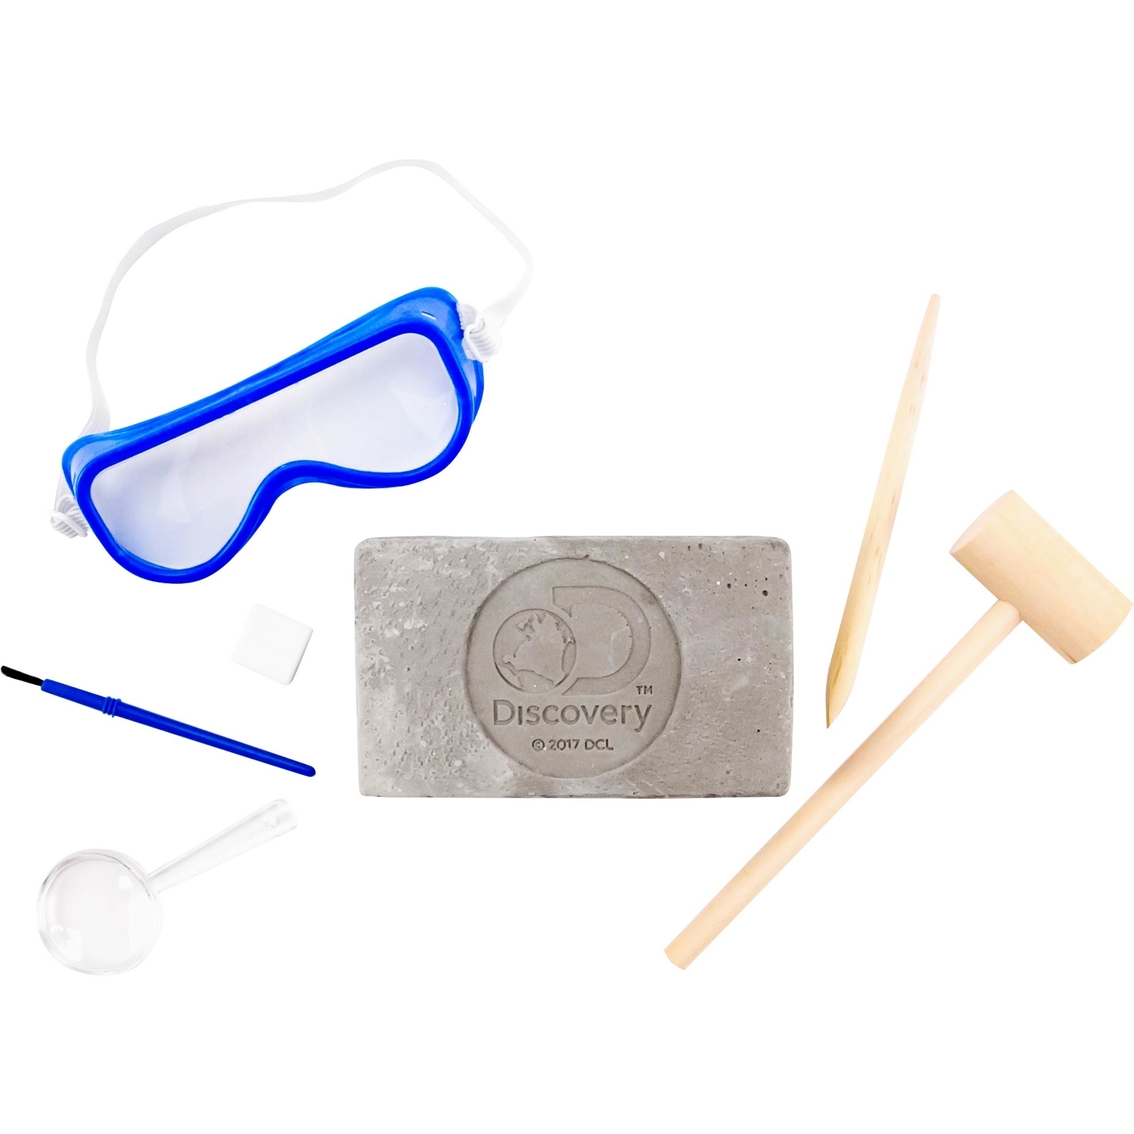 Discovery Gemstone Dig Kit - Image 2 of 2